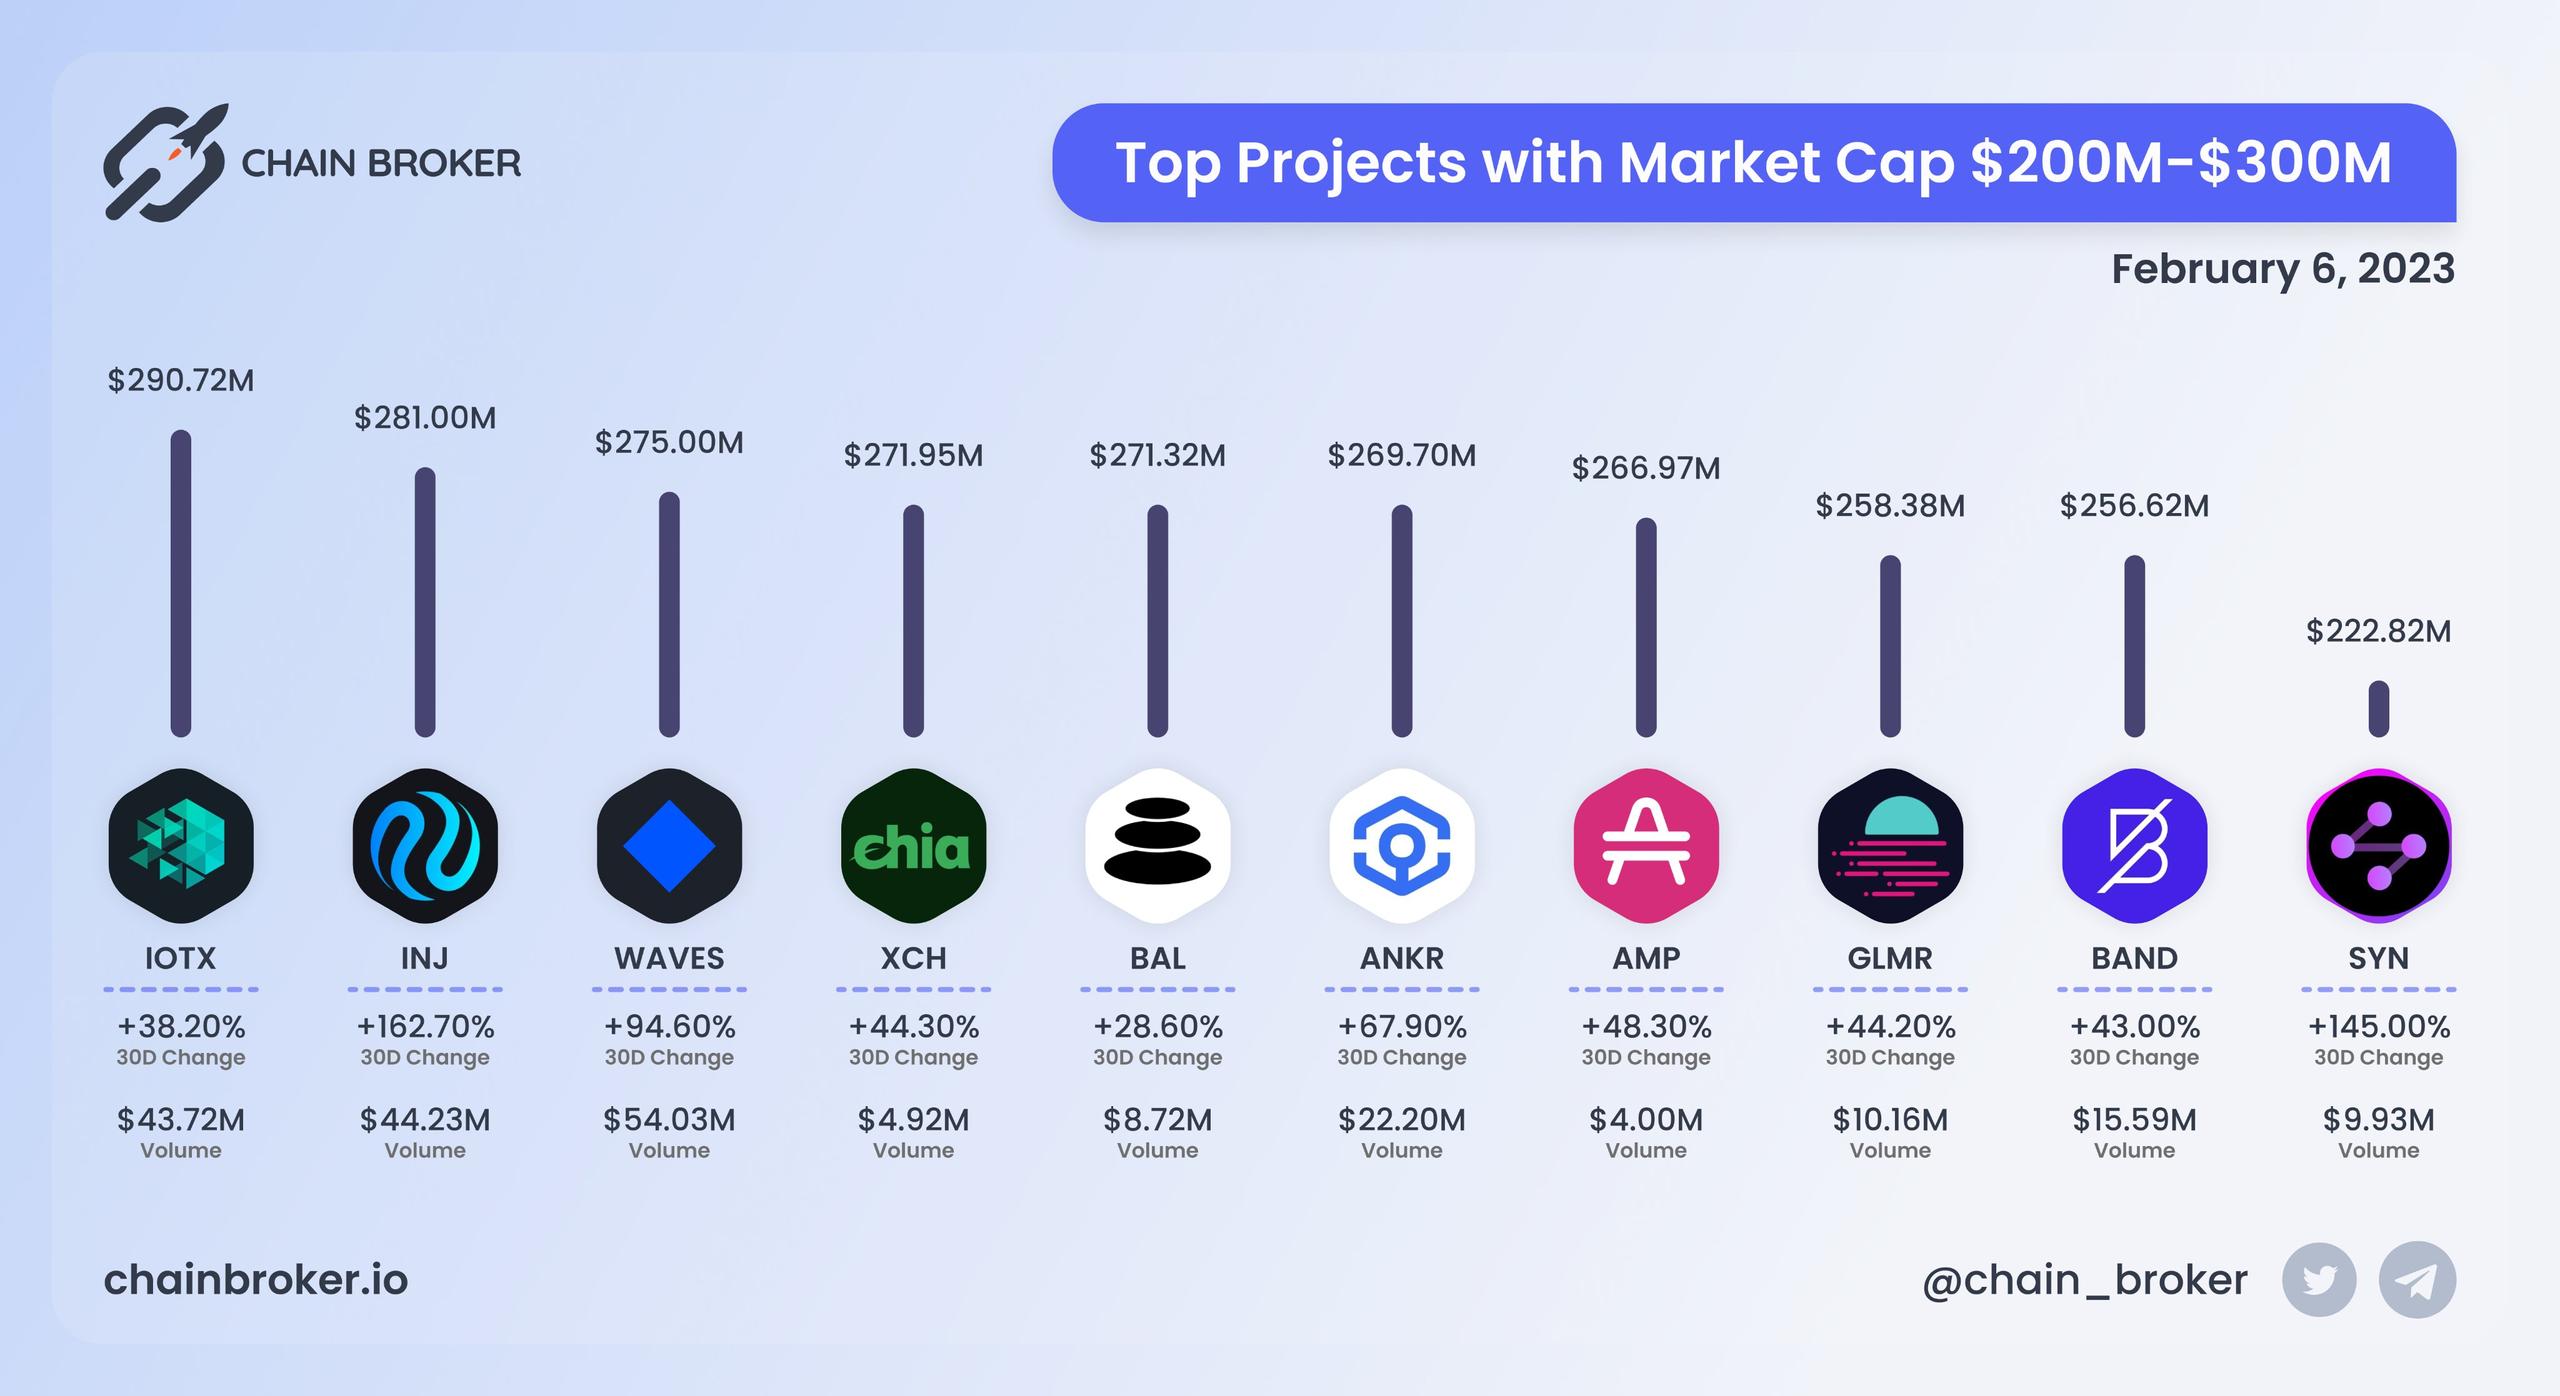 Top projects with Market Cap $200M - $300M